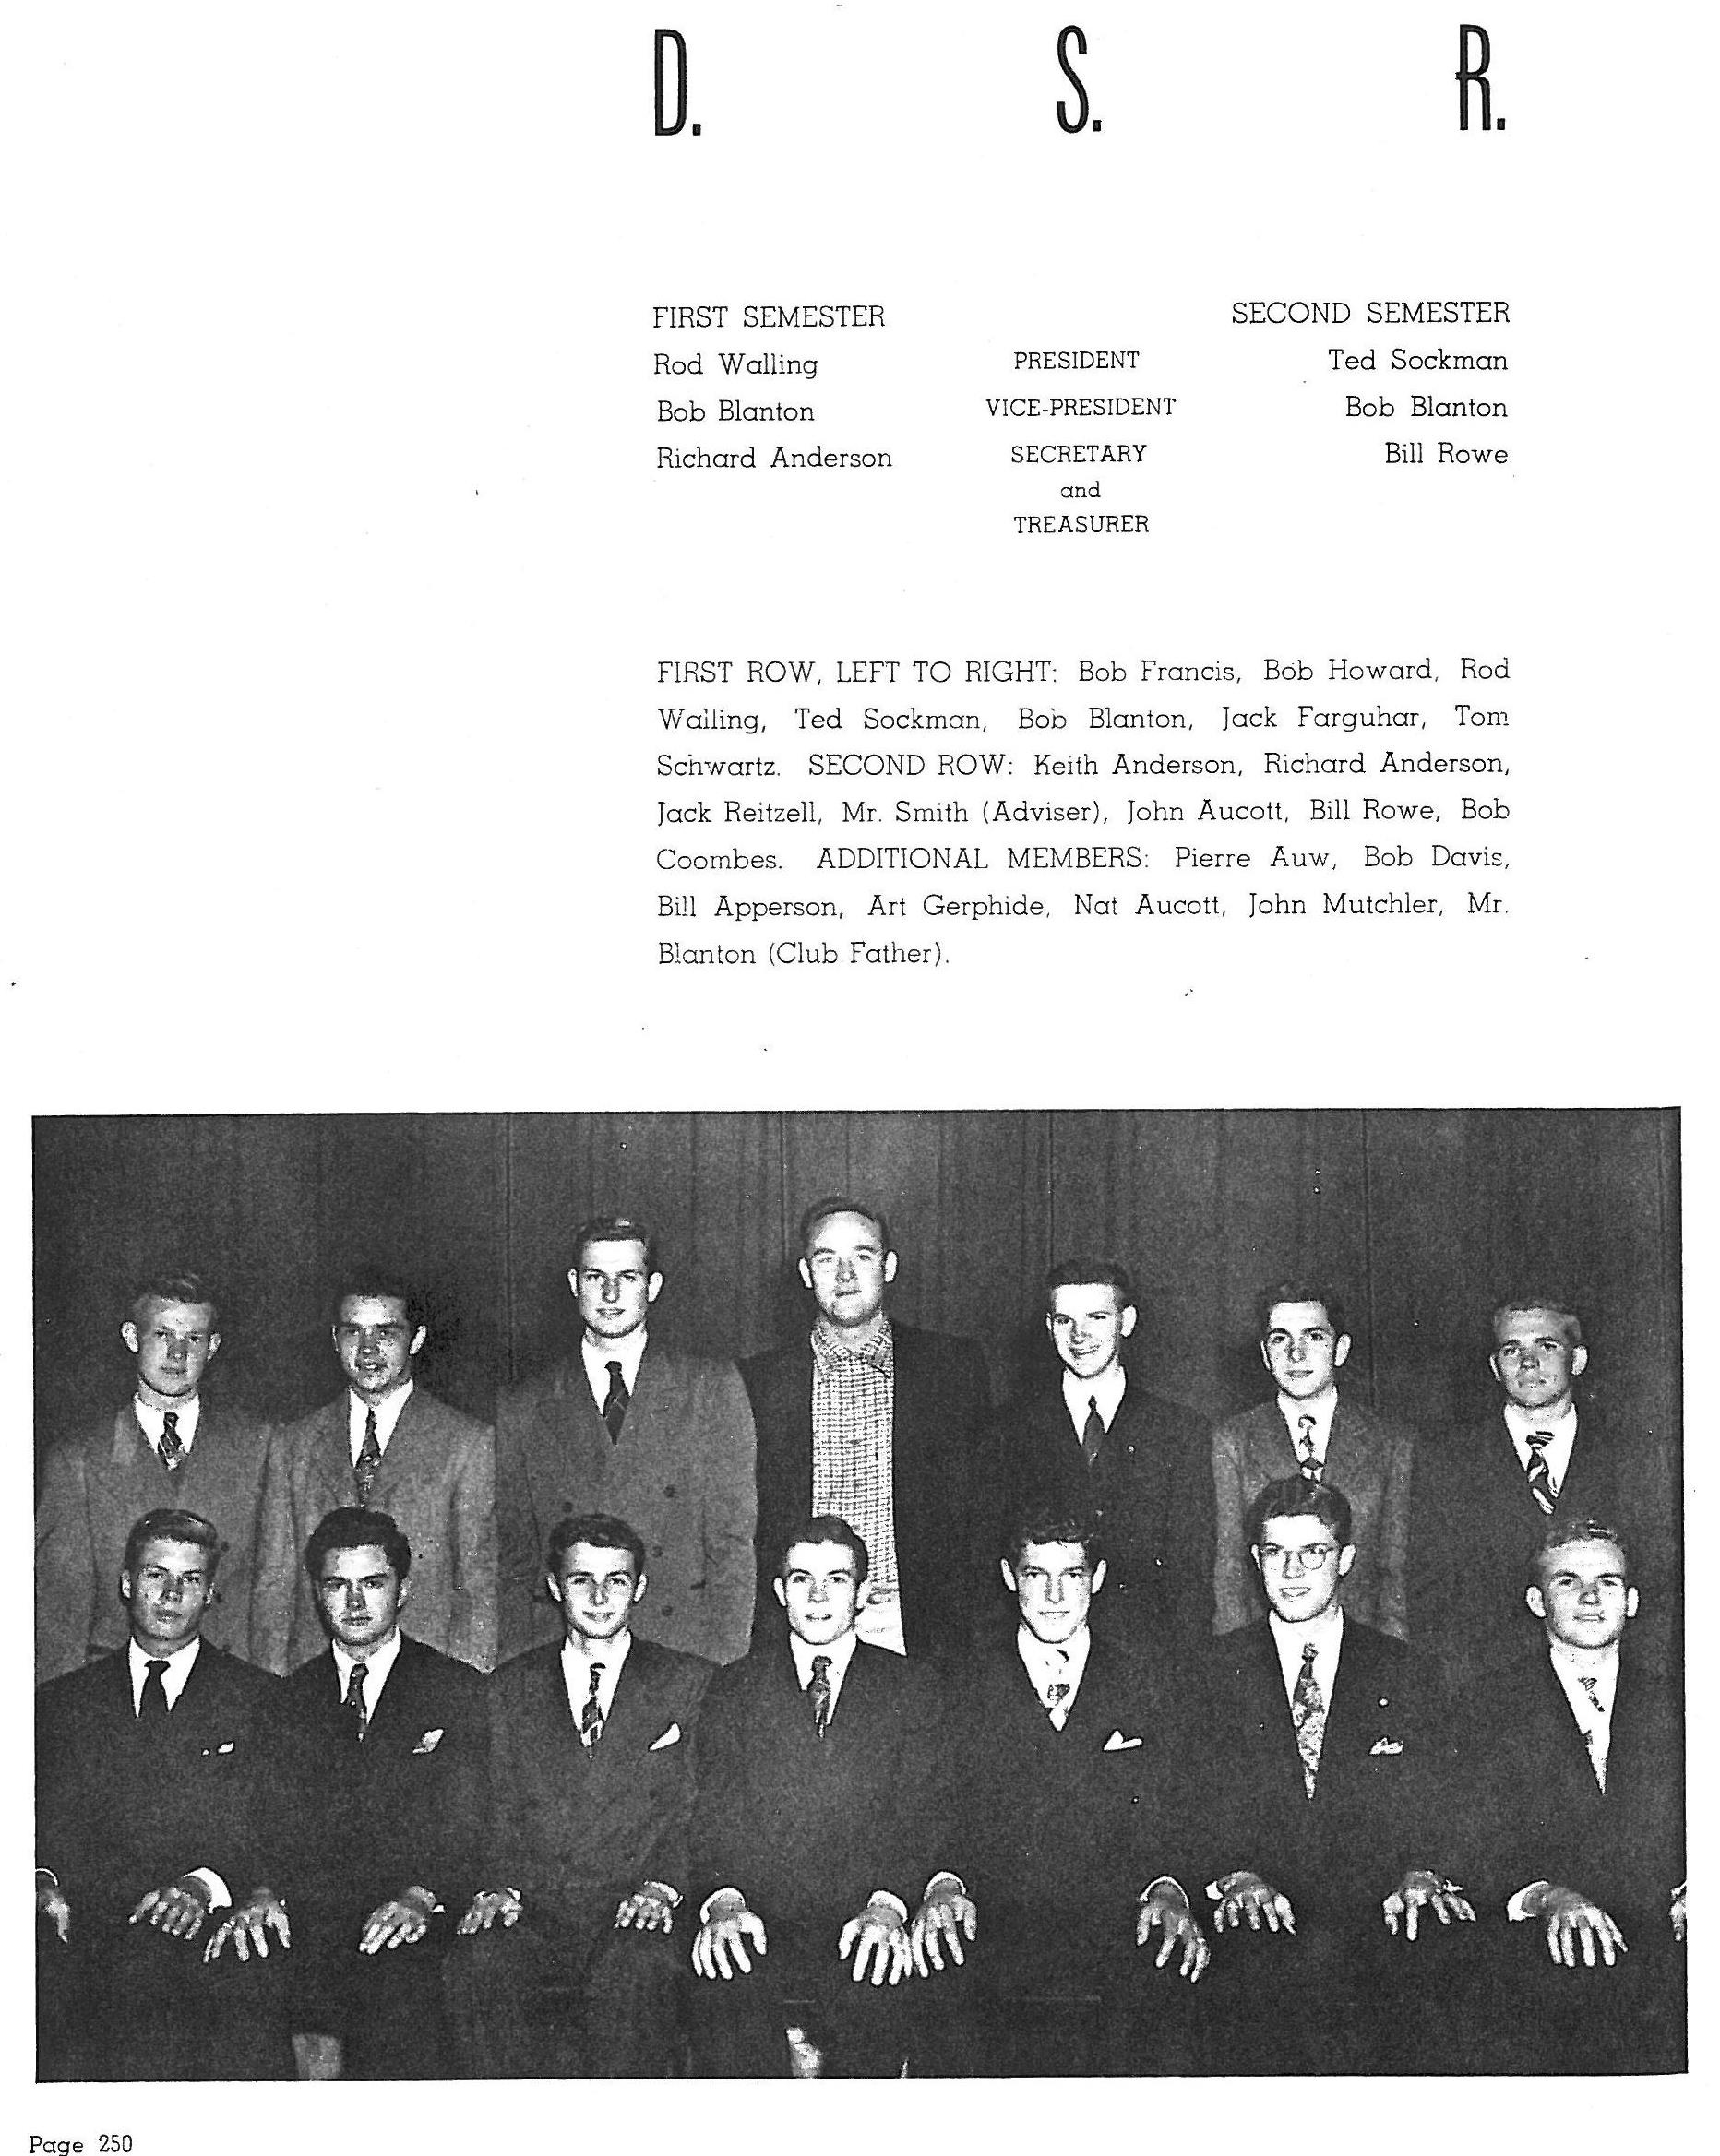  Delta Sigma Rho, Pasadena City College, c. 1947  Bob is seated at the far left in the first row in this photo from the 1947  Campus  yearbook. 